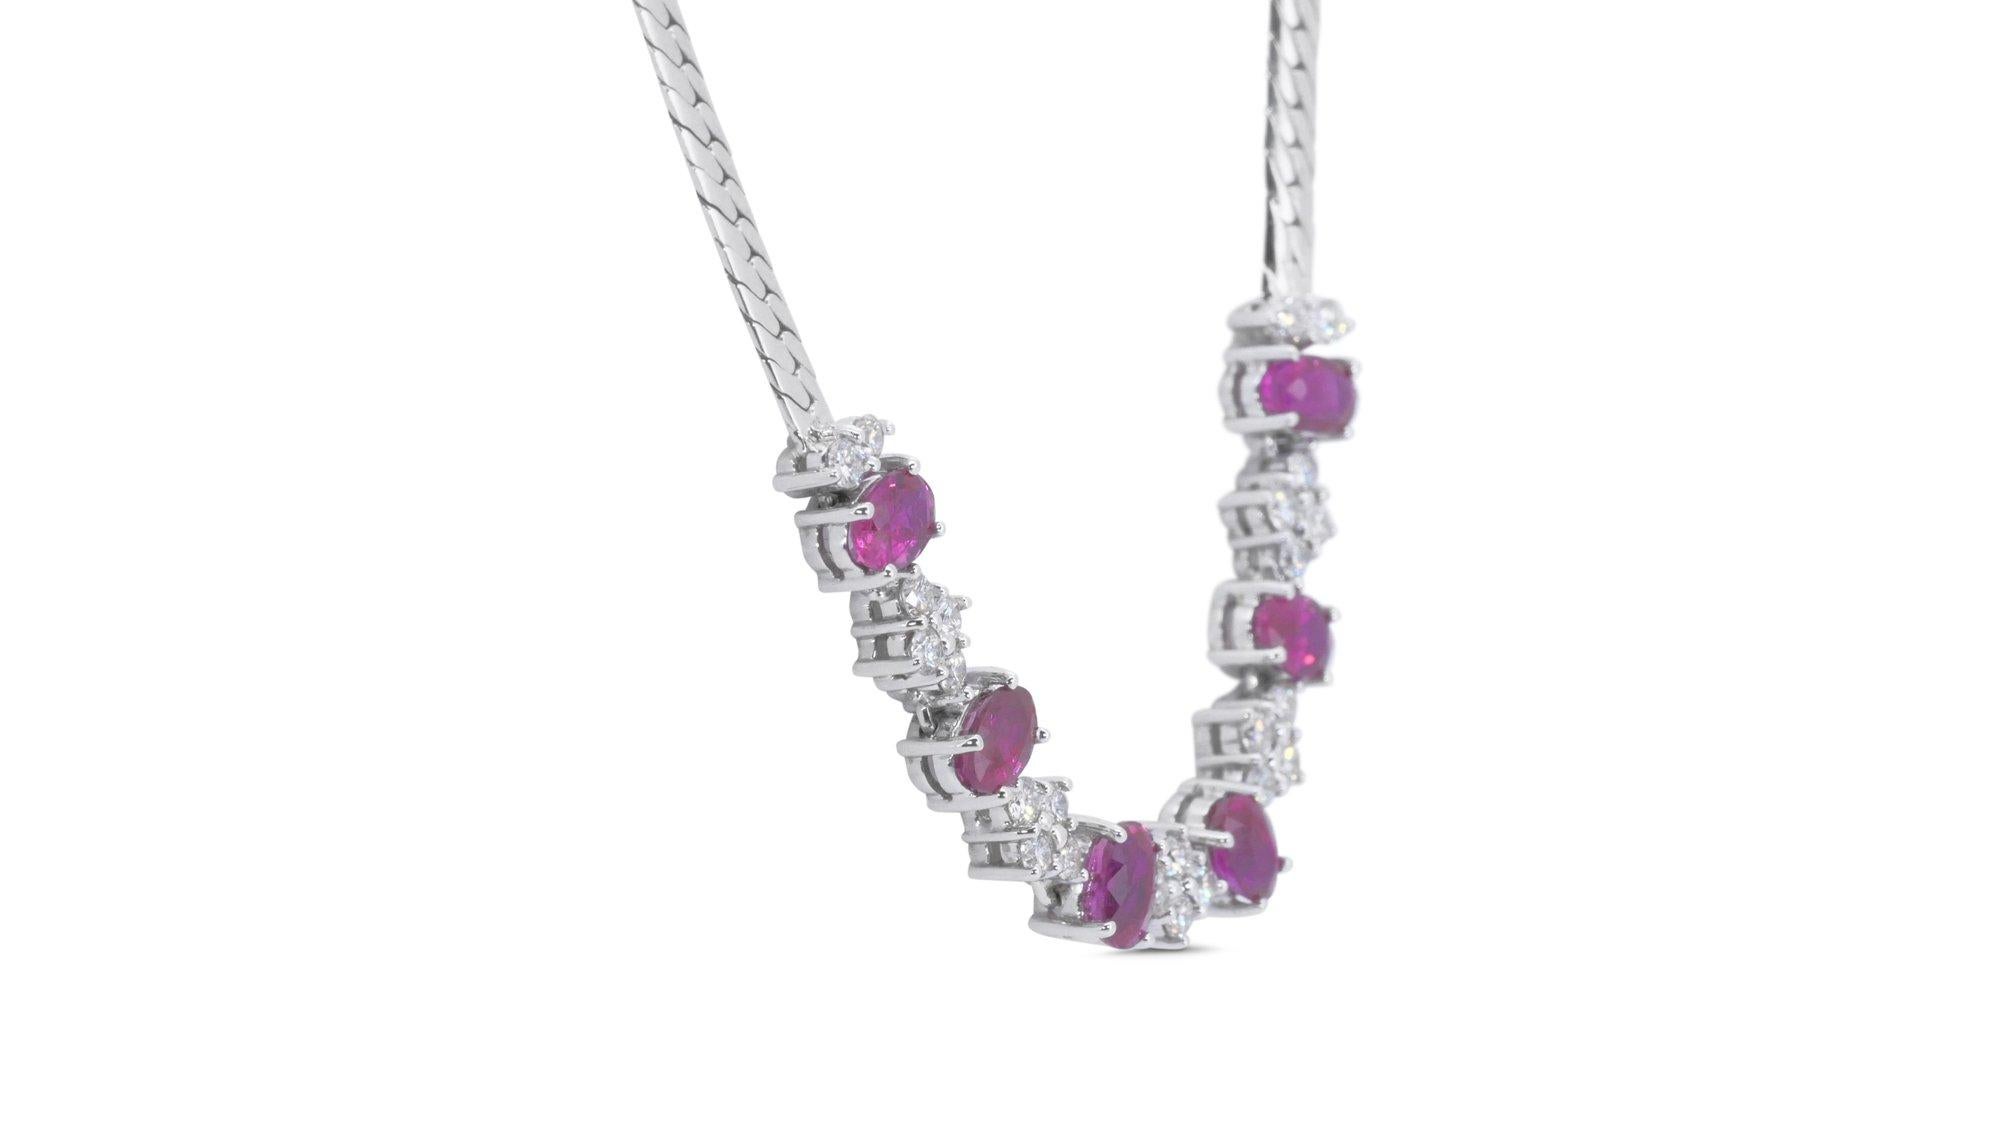 Women's Dazzling 18k White Gold Necklace w/ 2.85ct Rubies and Natural Diamonds IGI Cert